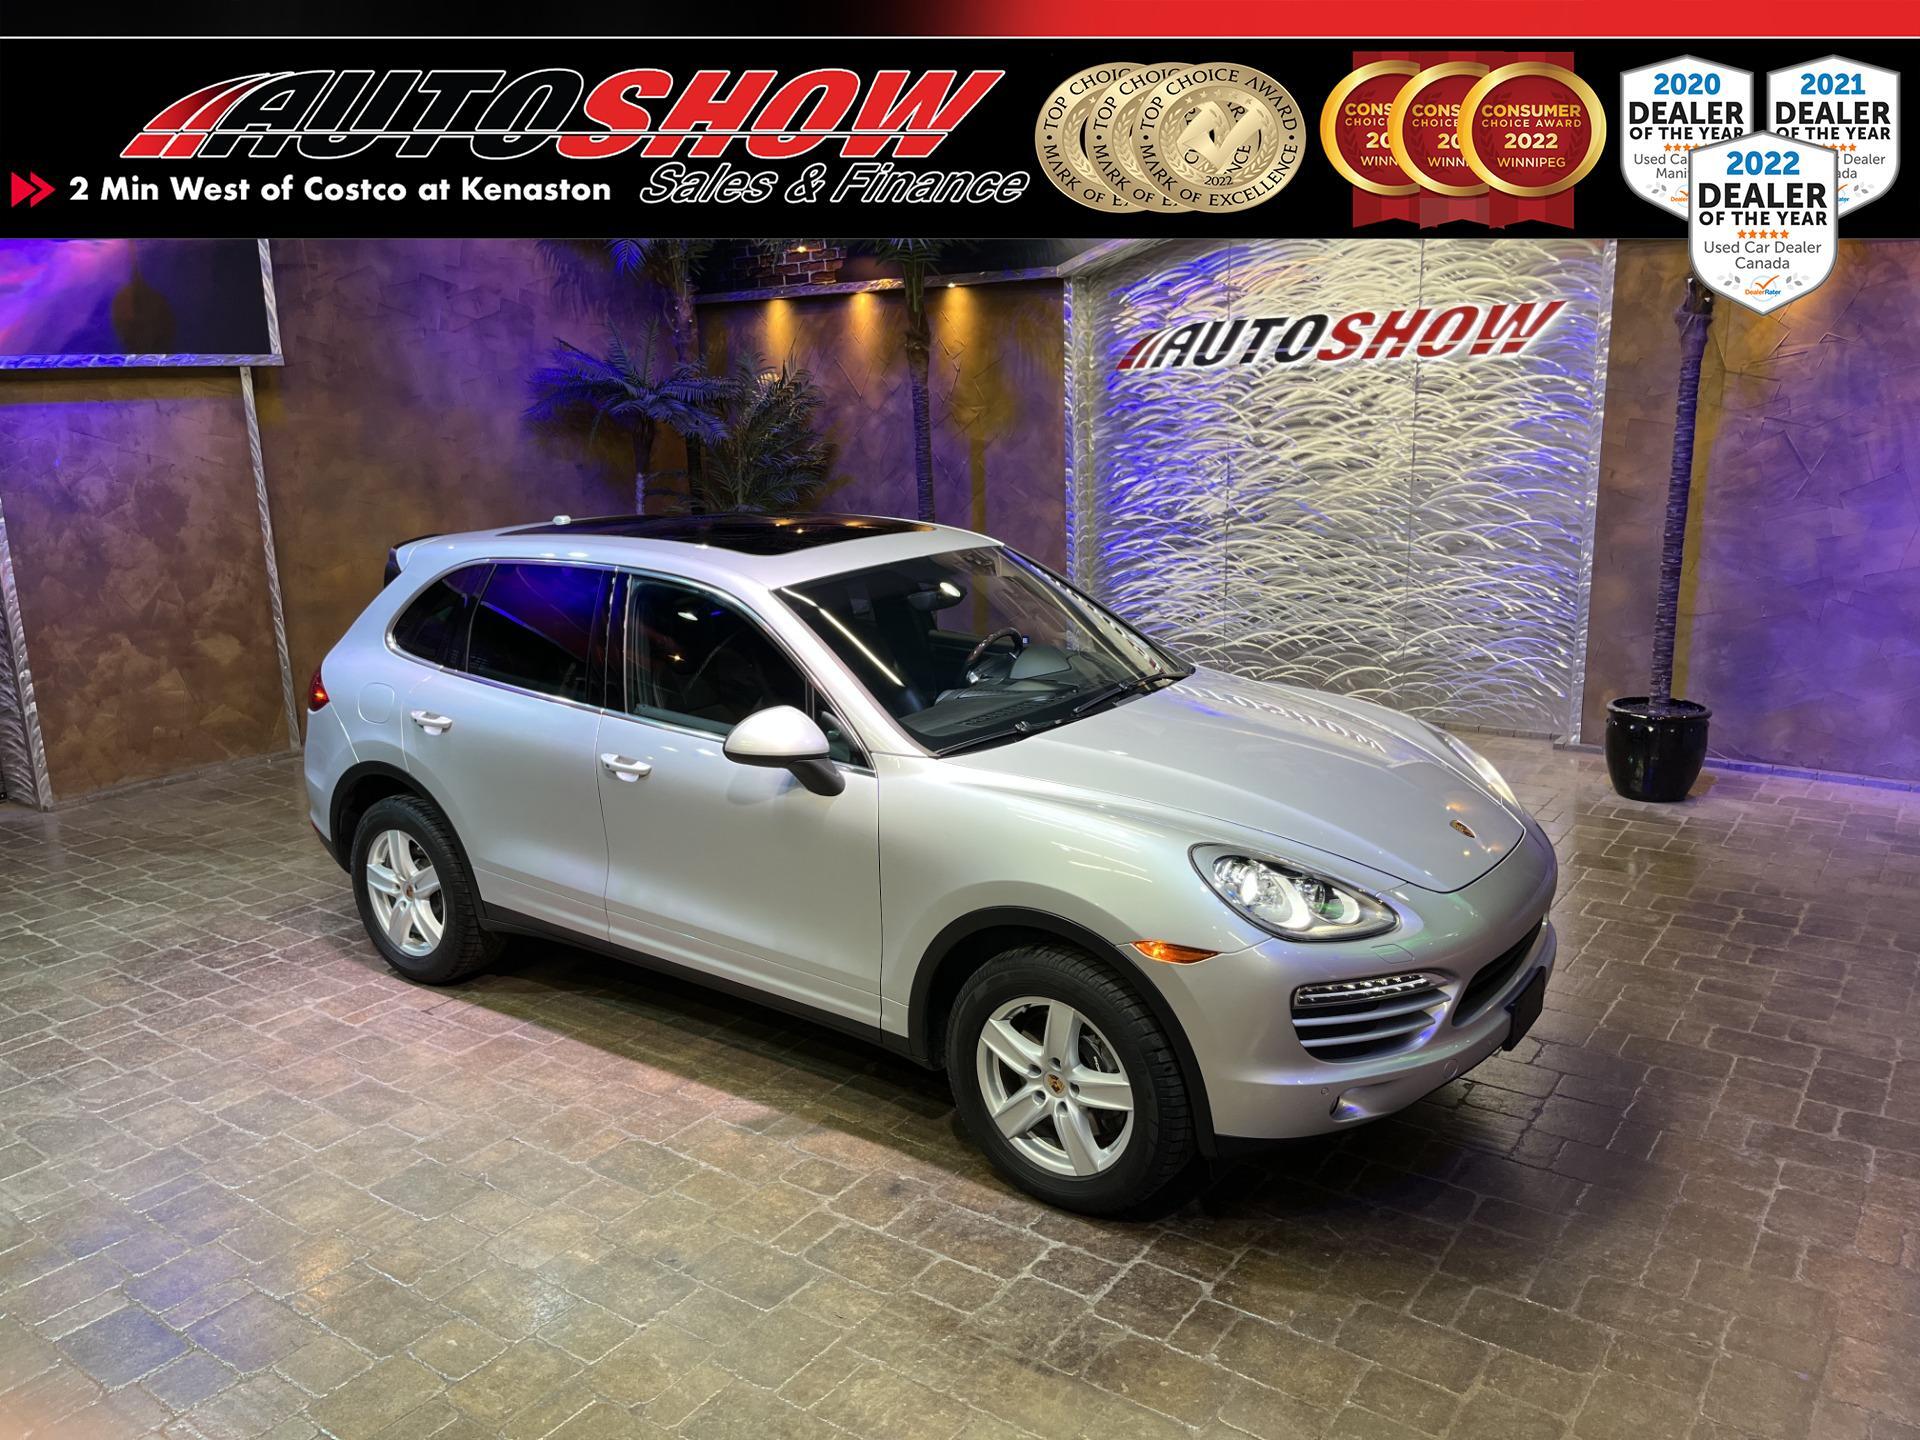 2013 Porsche Cayenne Local w/ Excellent History! Htd/Cooled Leather, Pa